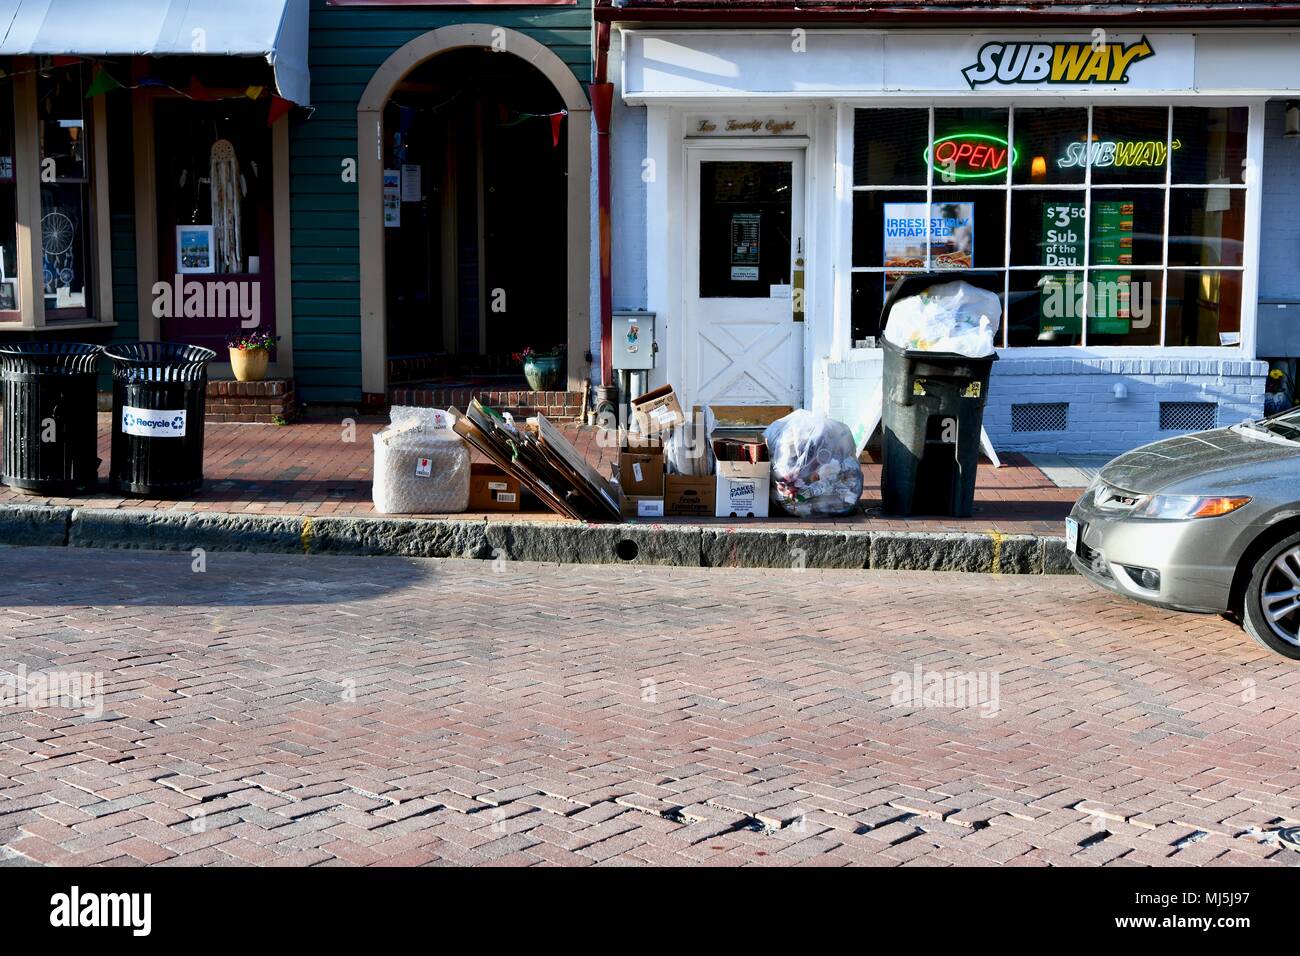 Trash and recycling piled up on the sidewalk outside a subway restaurant in Annapolis, MD, USA Stock Photo